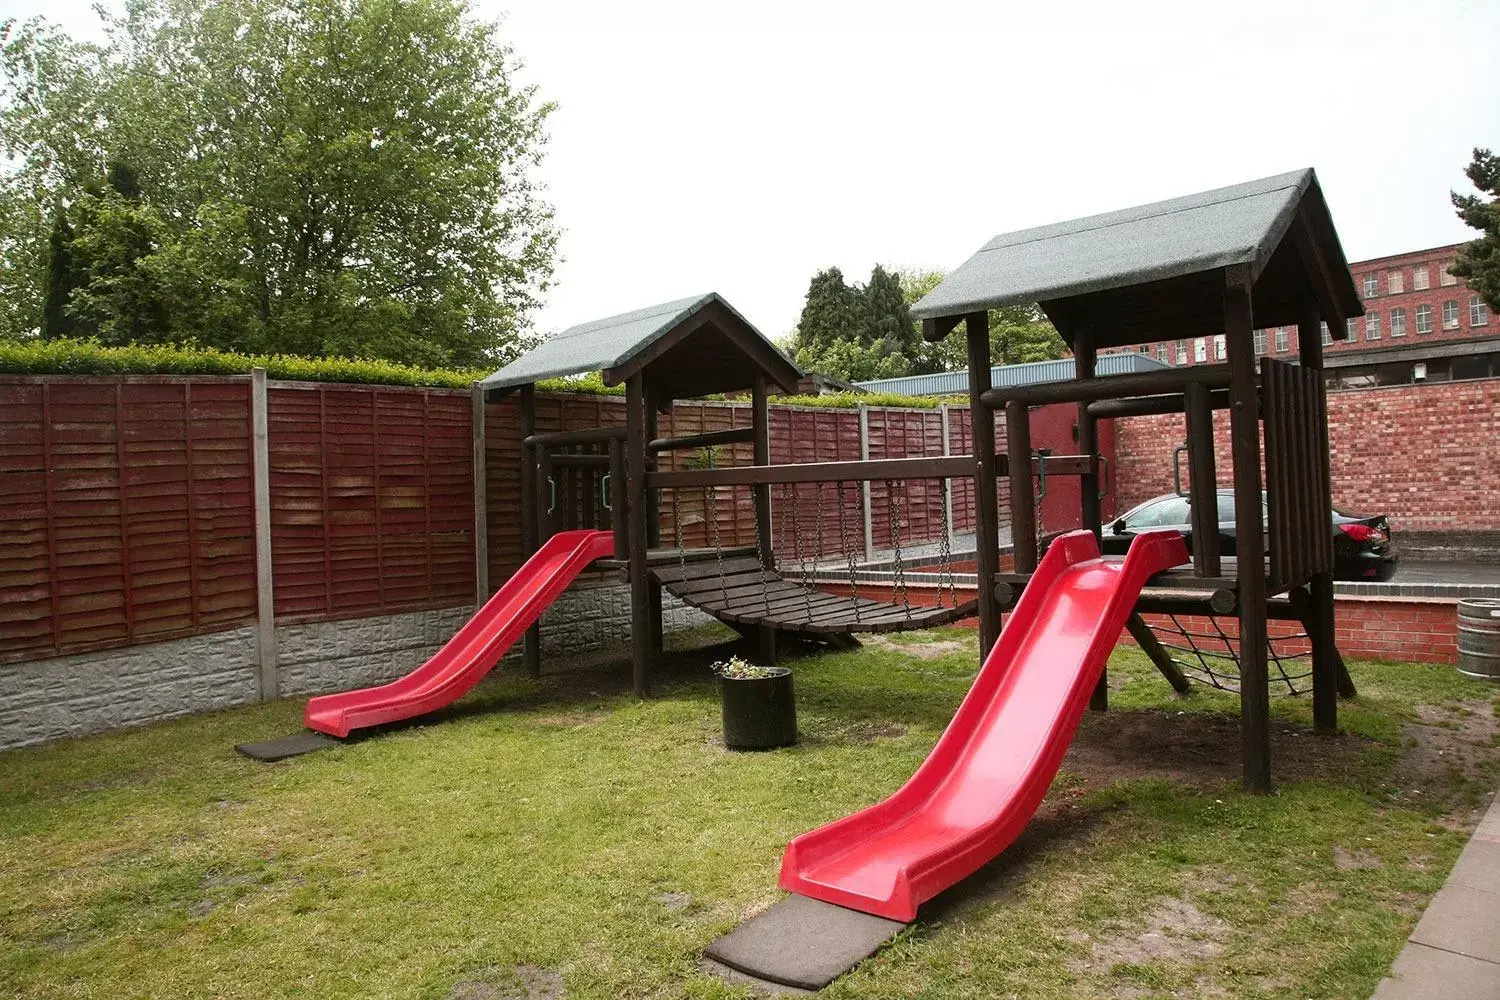 Property building, Children's Play Area in The Fazeley Inn